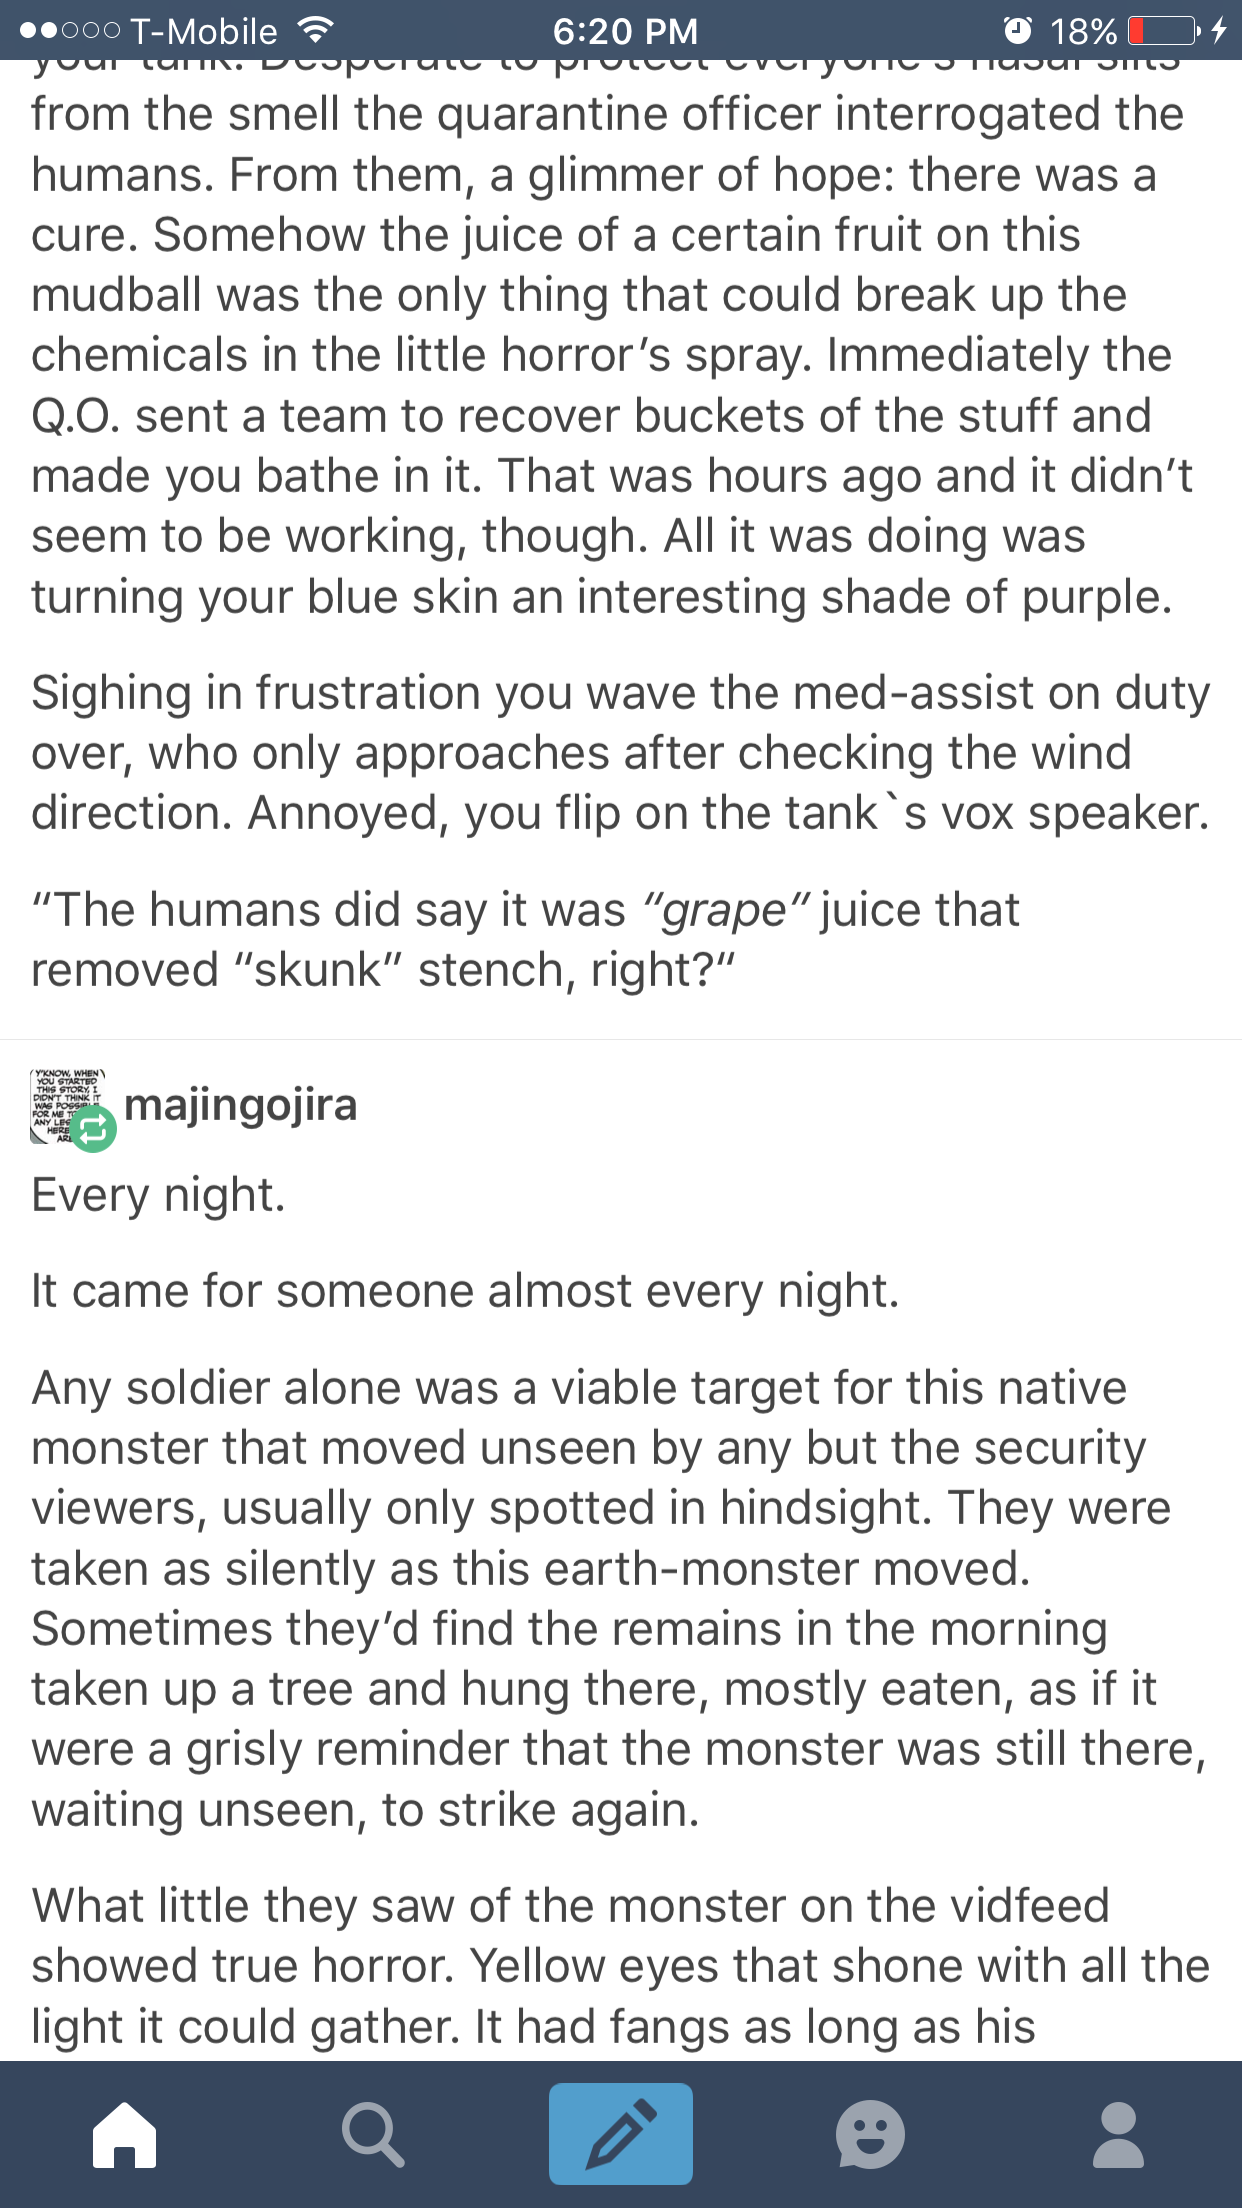 tumblr - aliens tumblr human - .000 TMobile 18%C4 your um. Doporu vopurvururuyon ruvum from the smell the quarantine officer interrogated the humans. From them, a glimmer of hope there was a cure. Somehow the juice of a certain fruit on this mudball was t